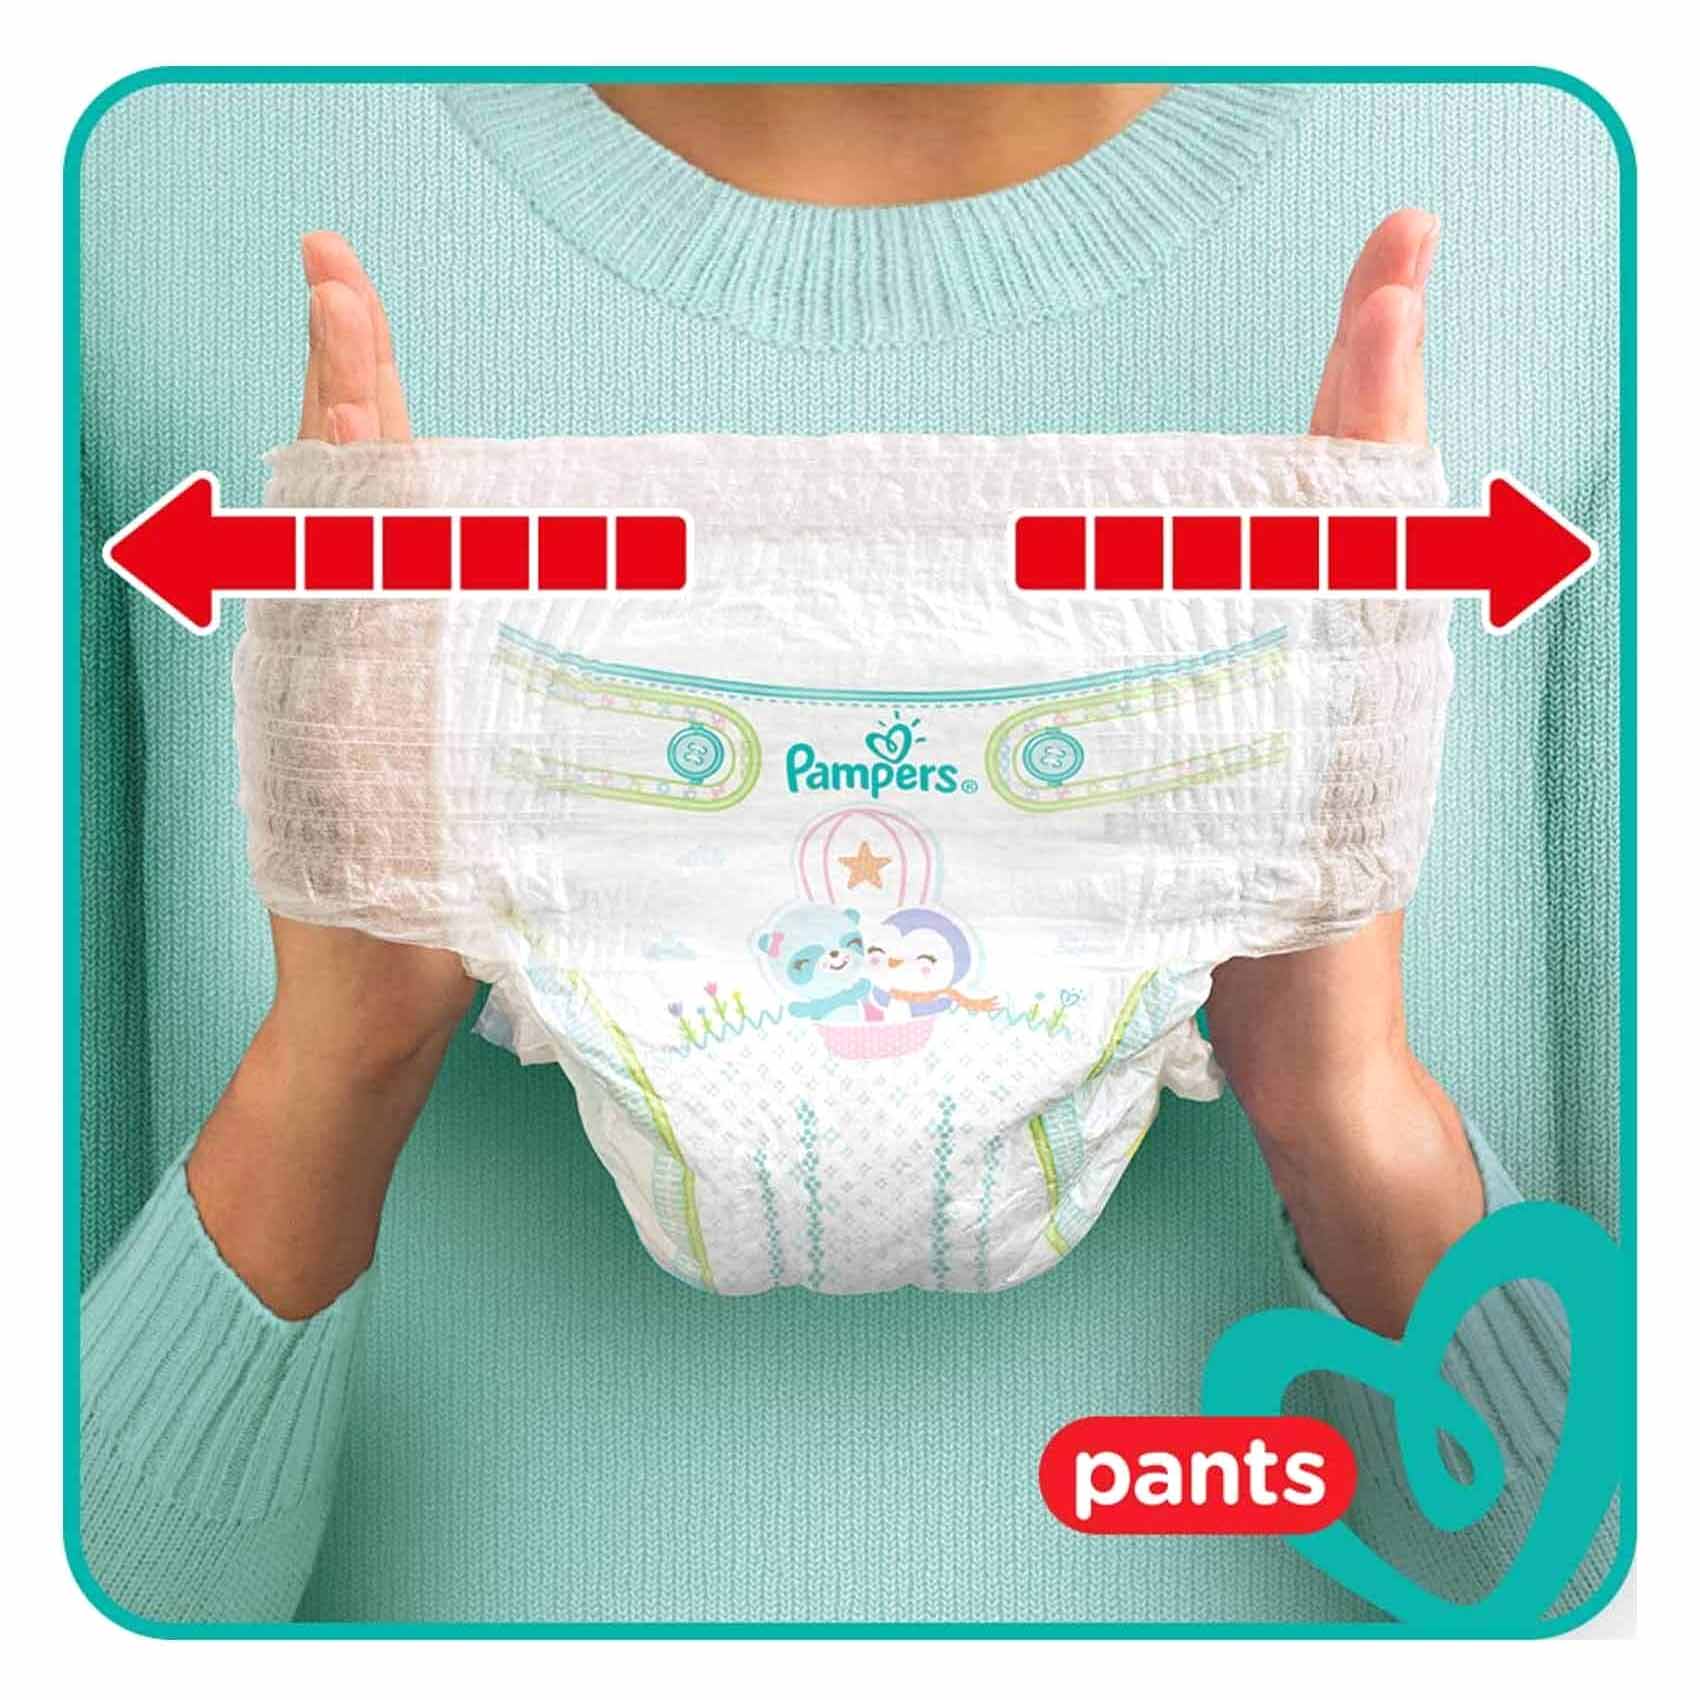 Pampers Pants Premium Care Diaper Extra Large Size 6 22 Count 16+kg